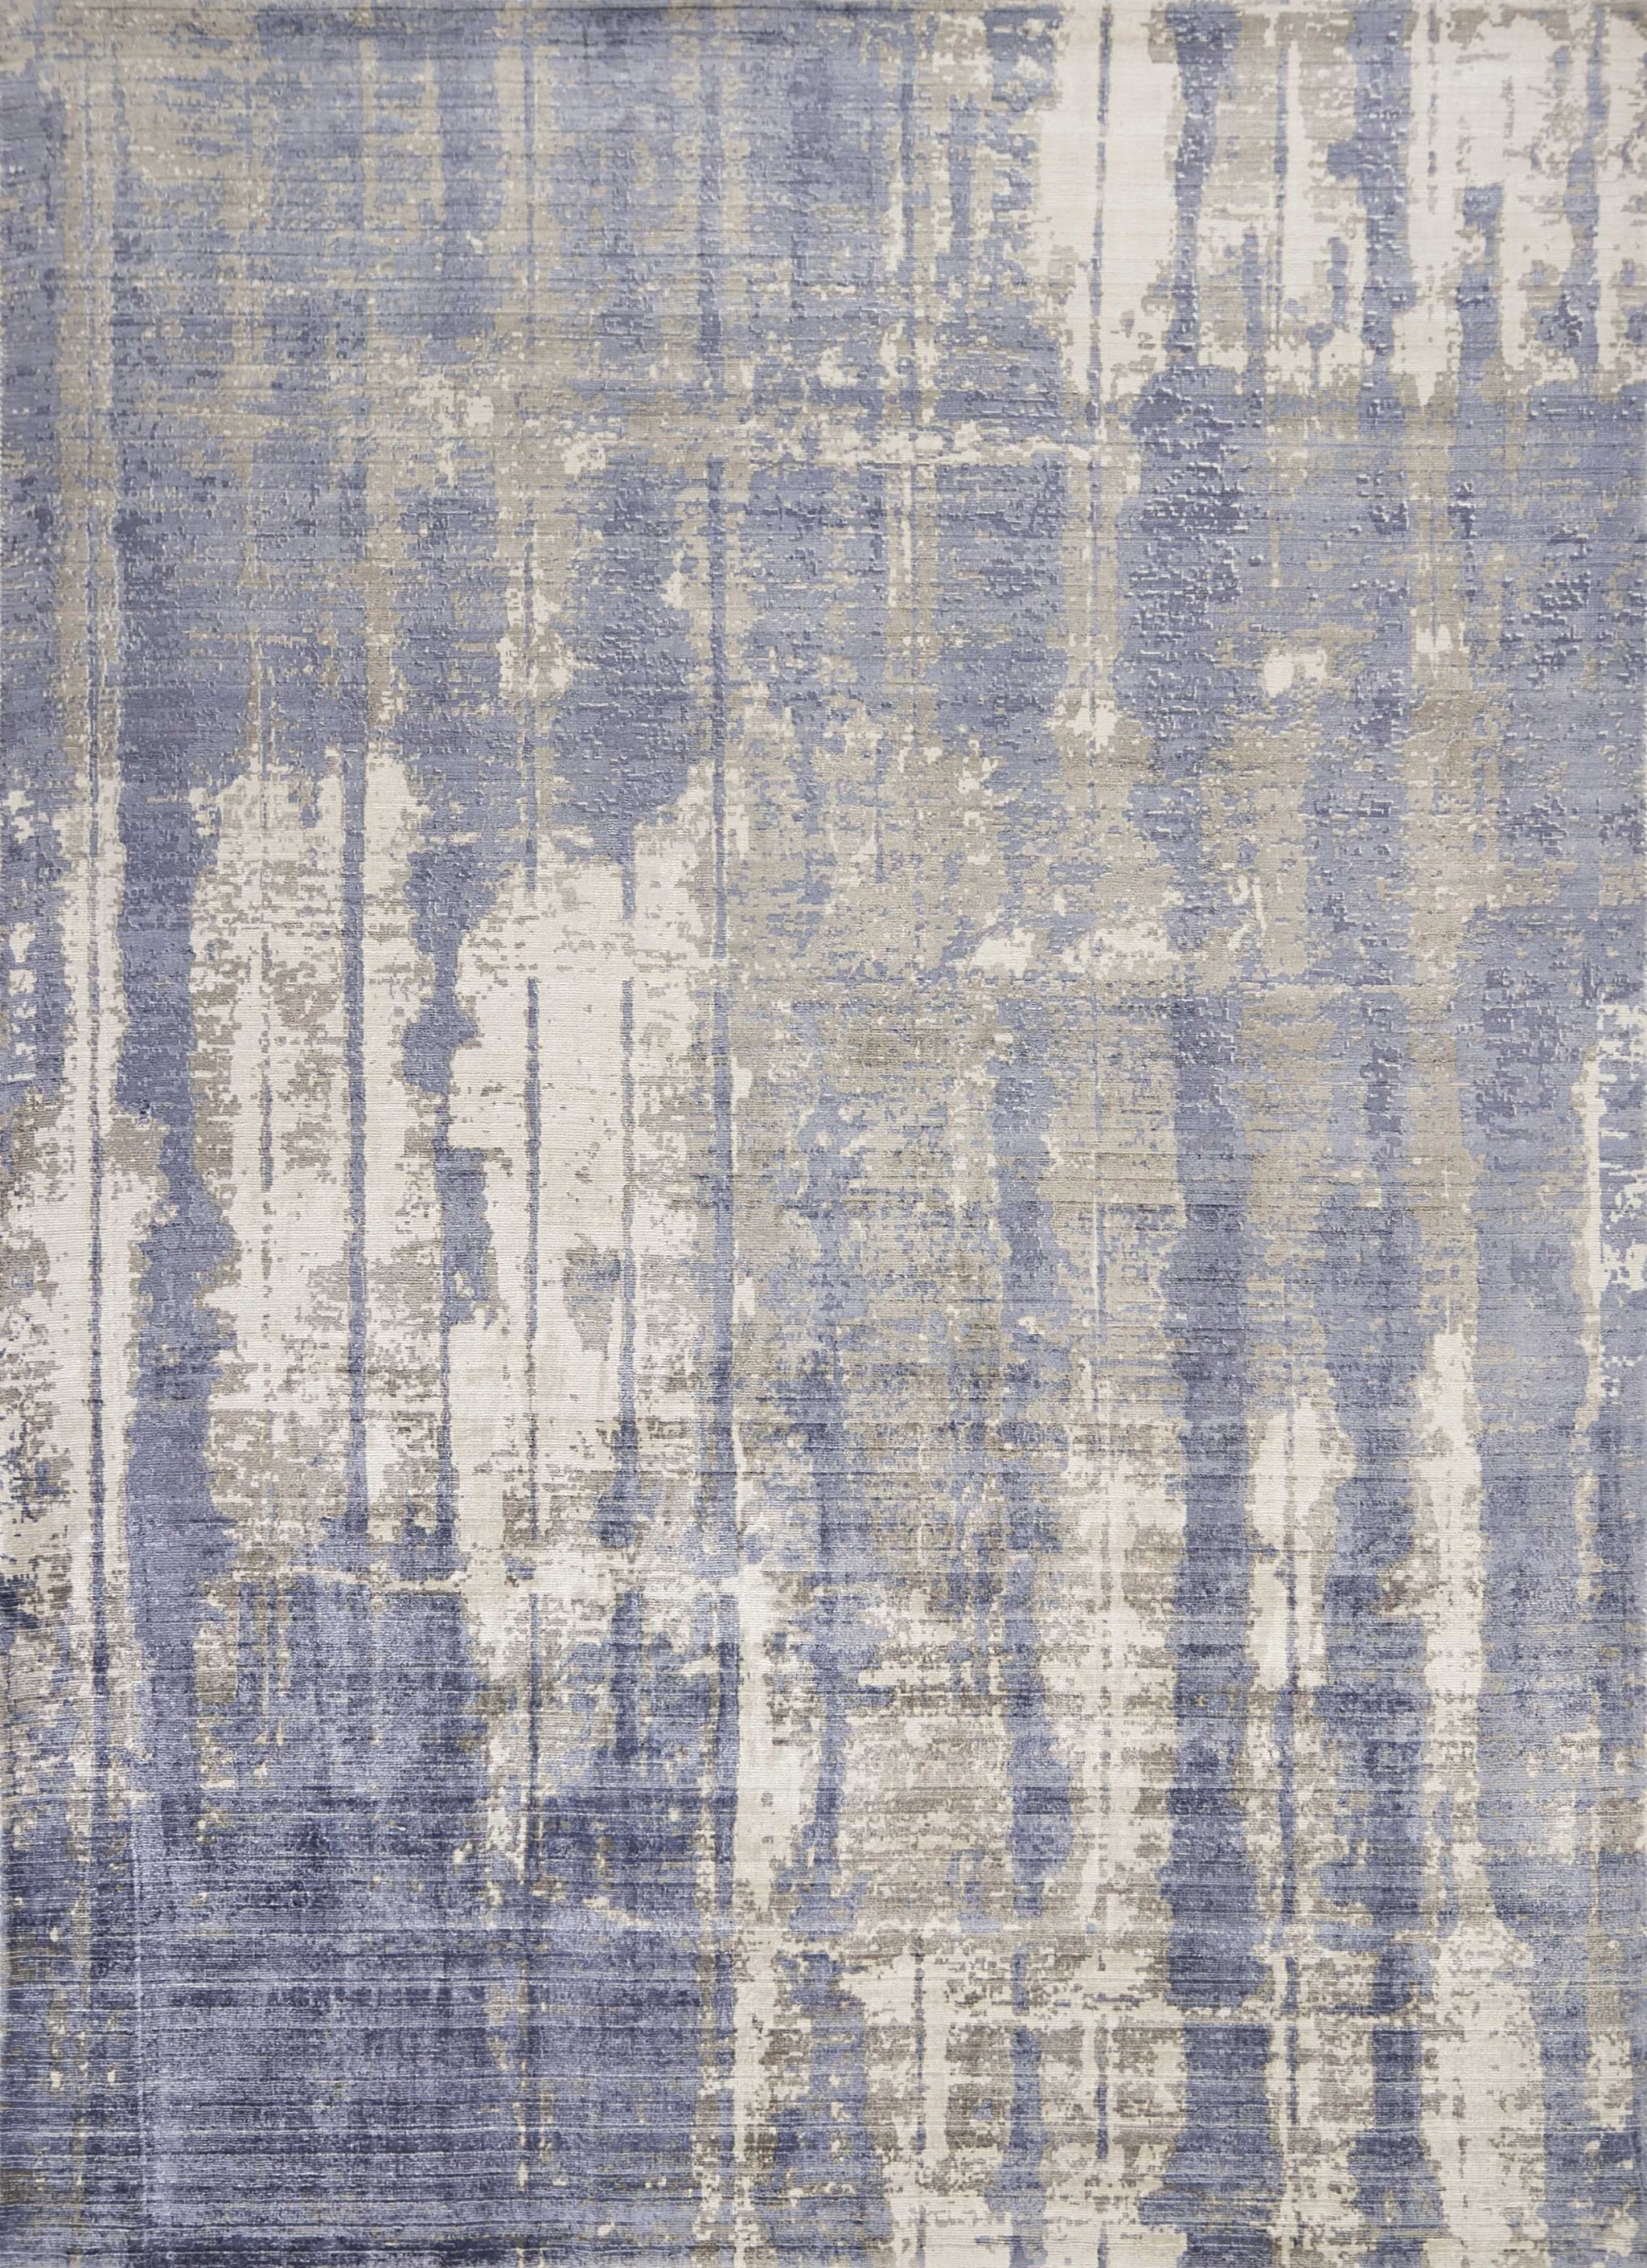 3' X 5' Blue and Gray Abstract Area Rug-352897-1